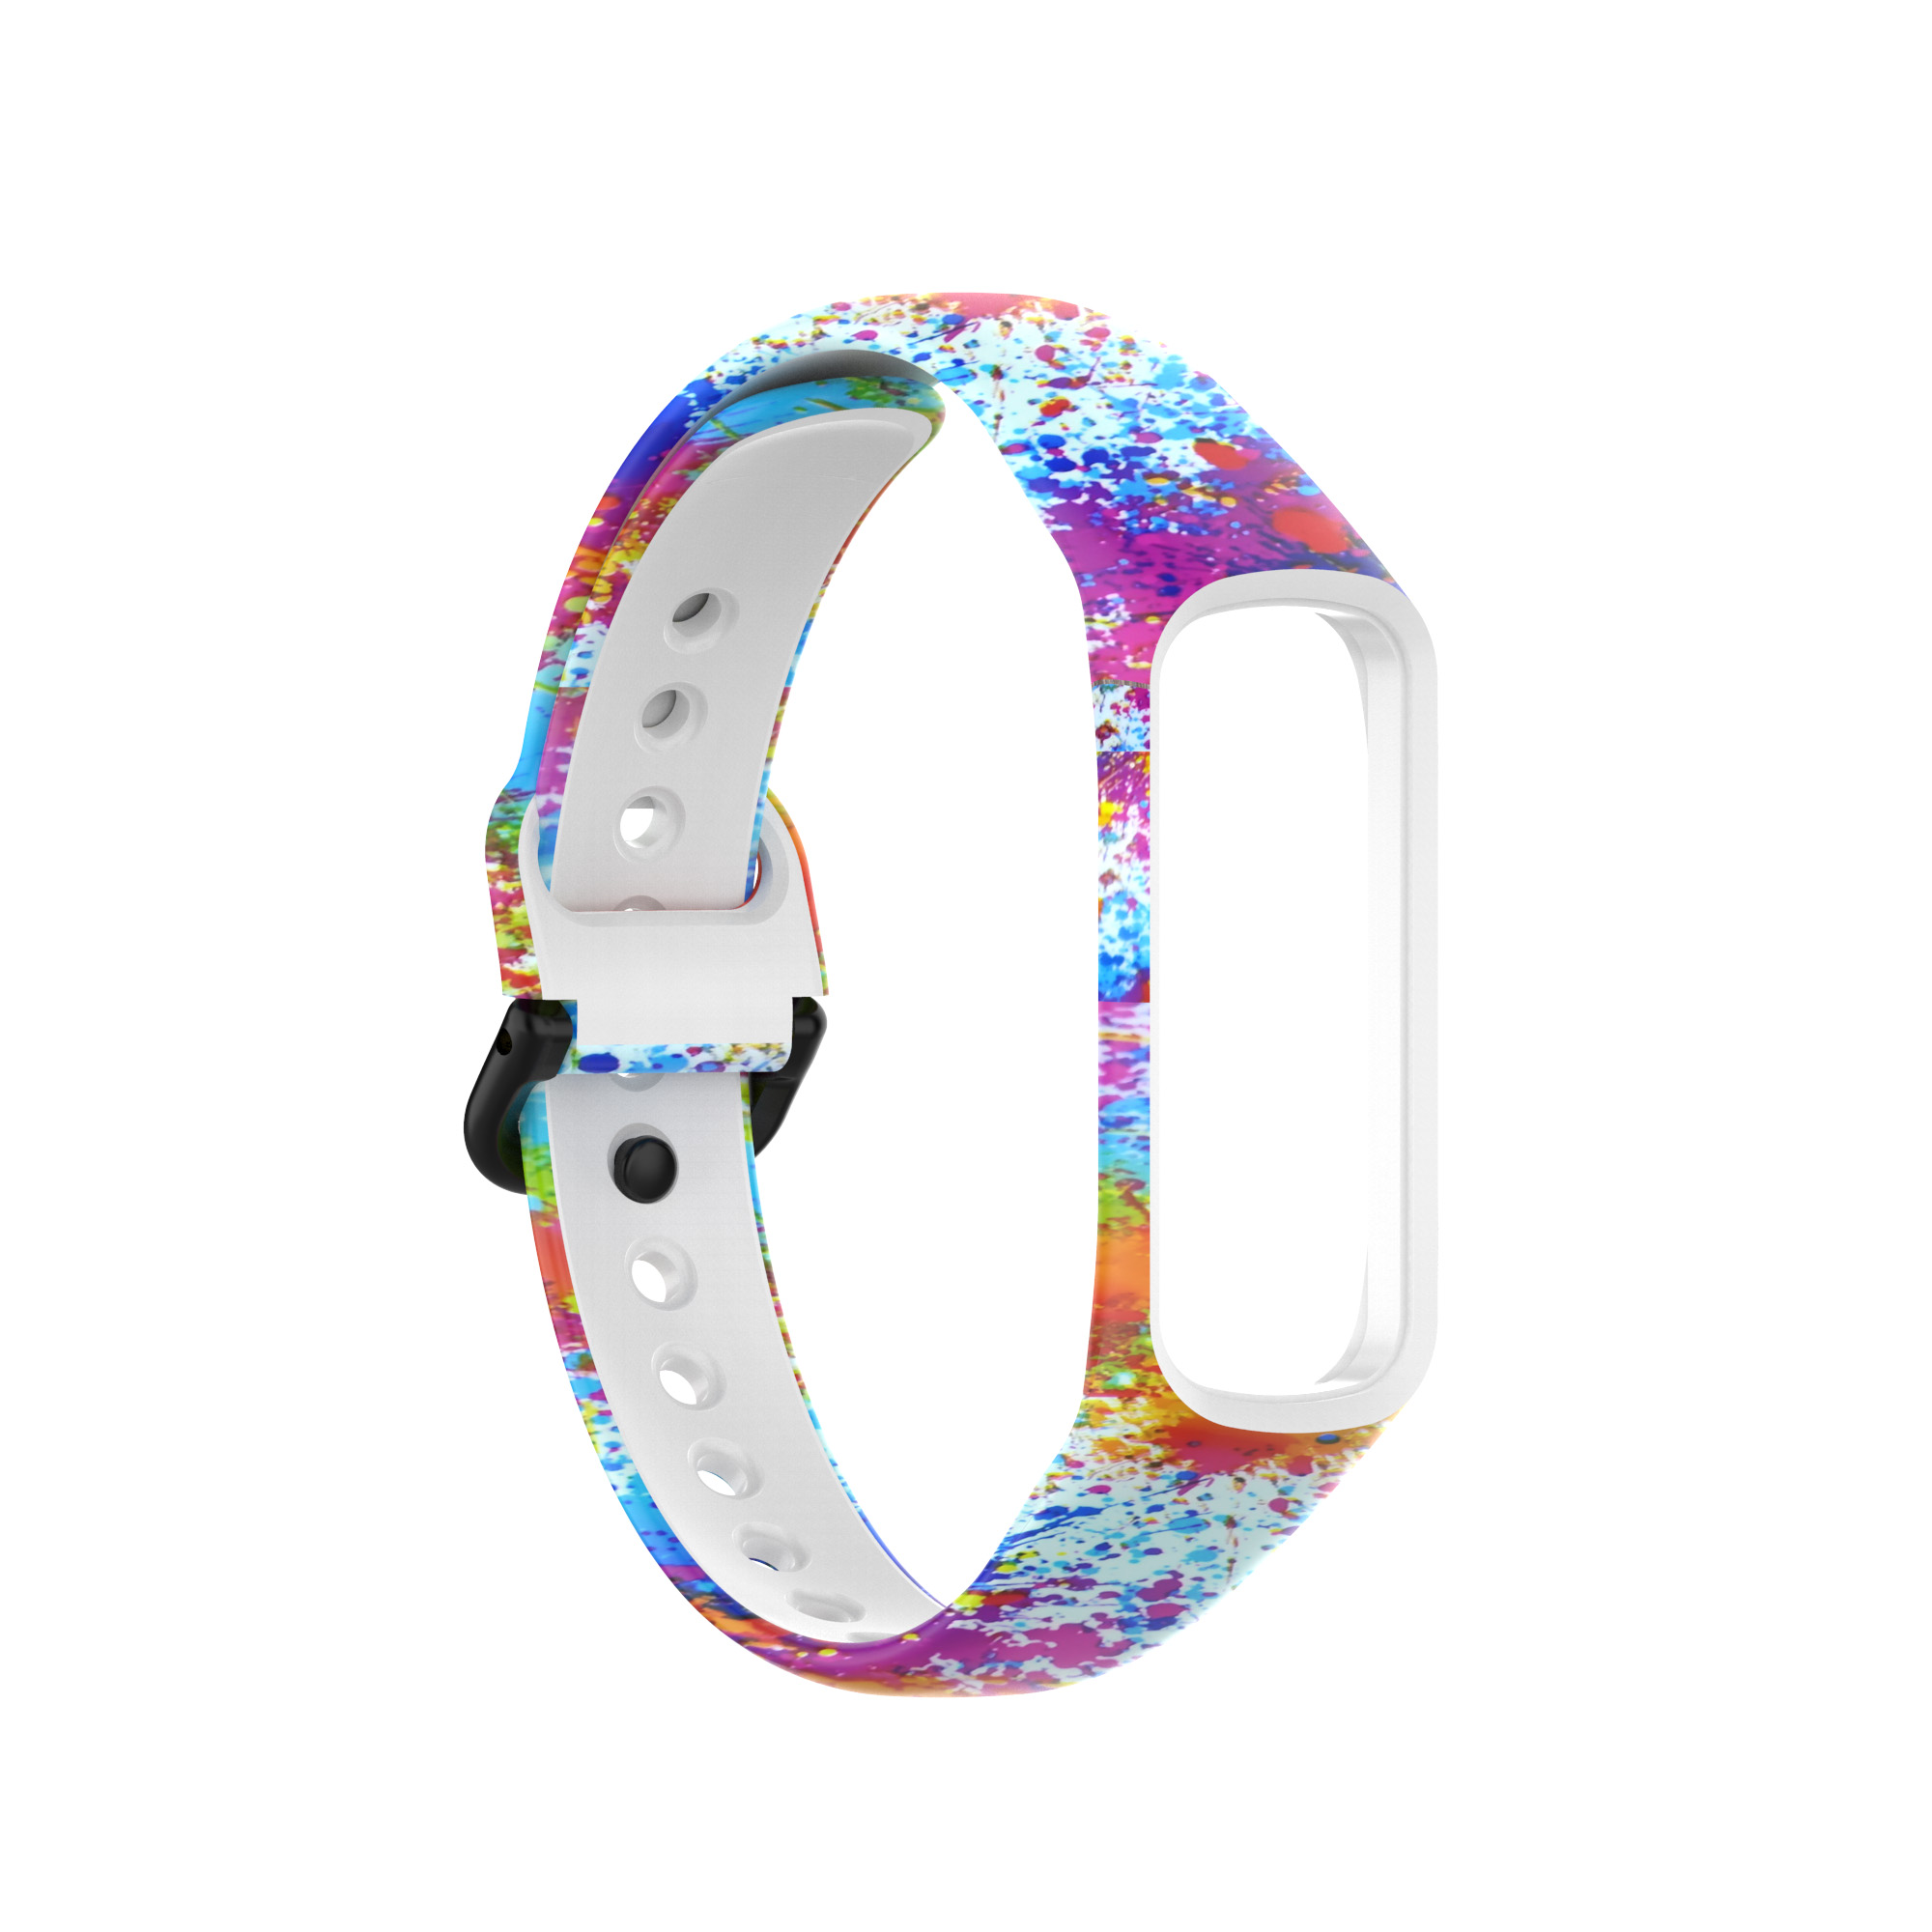 Bakeey-Printed-Pattern-Stainless-Steel-Buckle-Smart-watch-Band-Replacement-Strap-For-Samsung-Galaxy--1806217-4